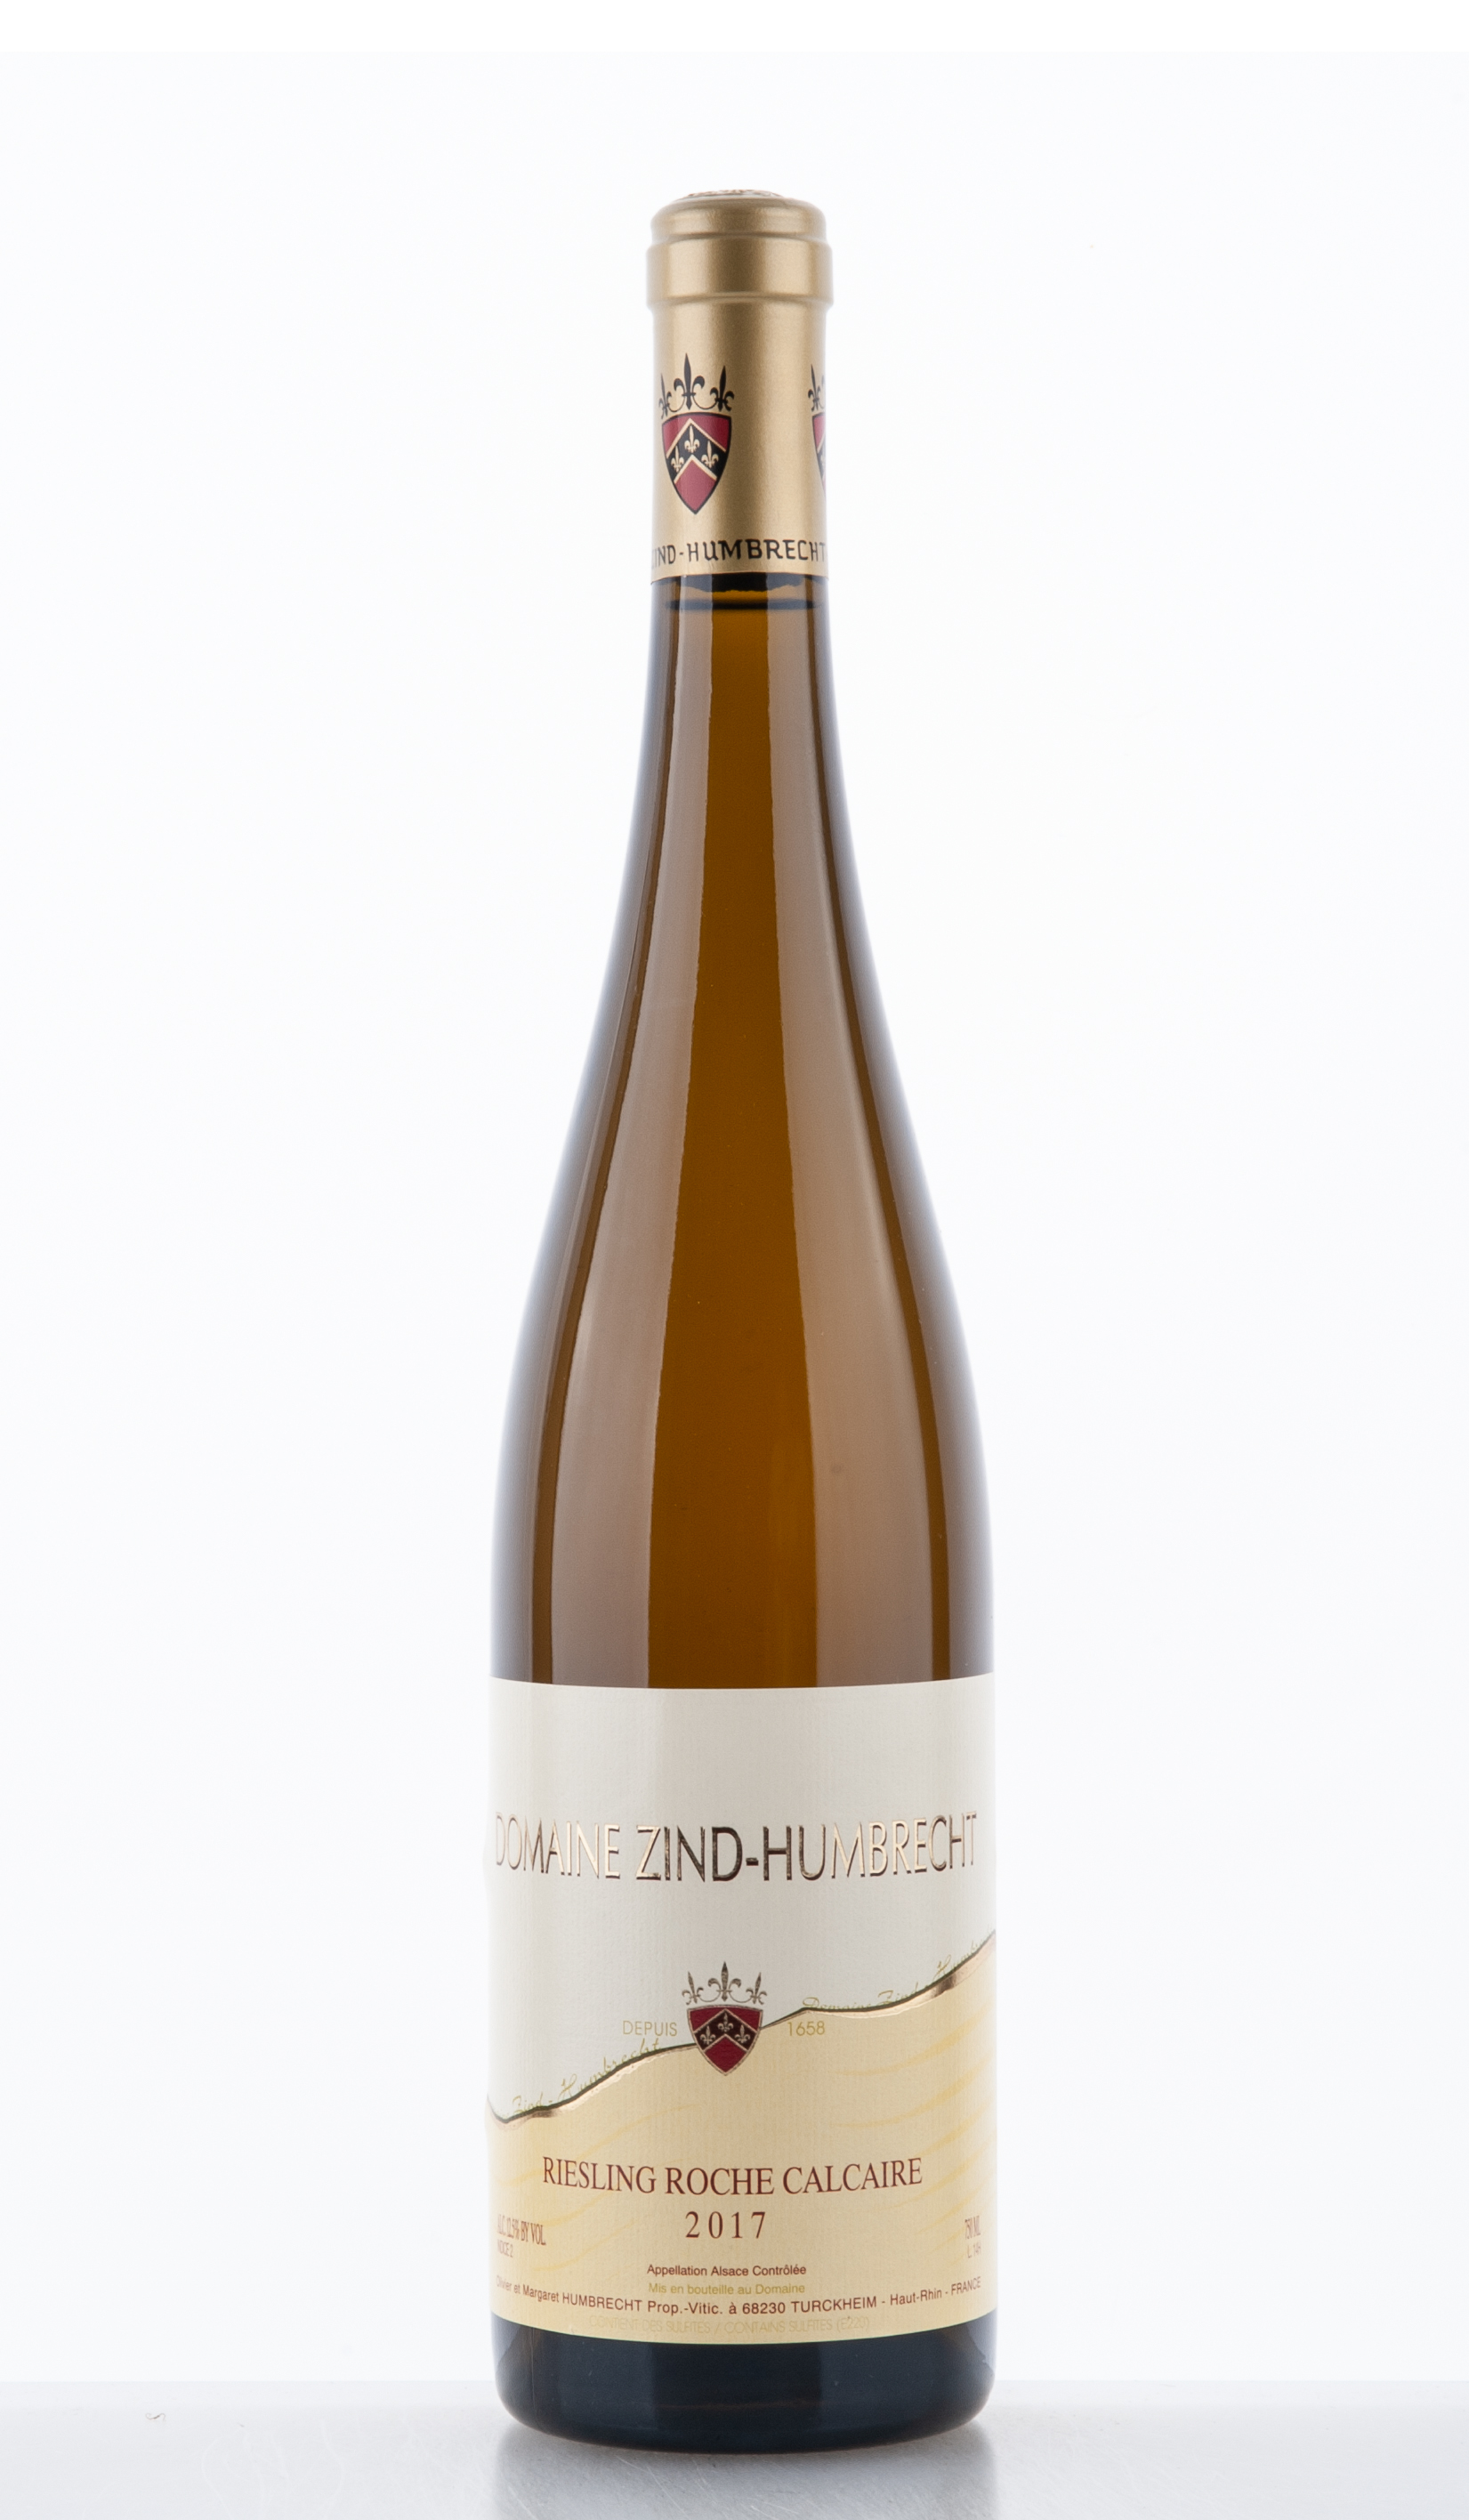 Riesling Roche Calcaire, late release